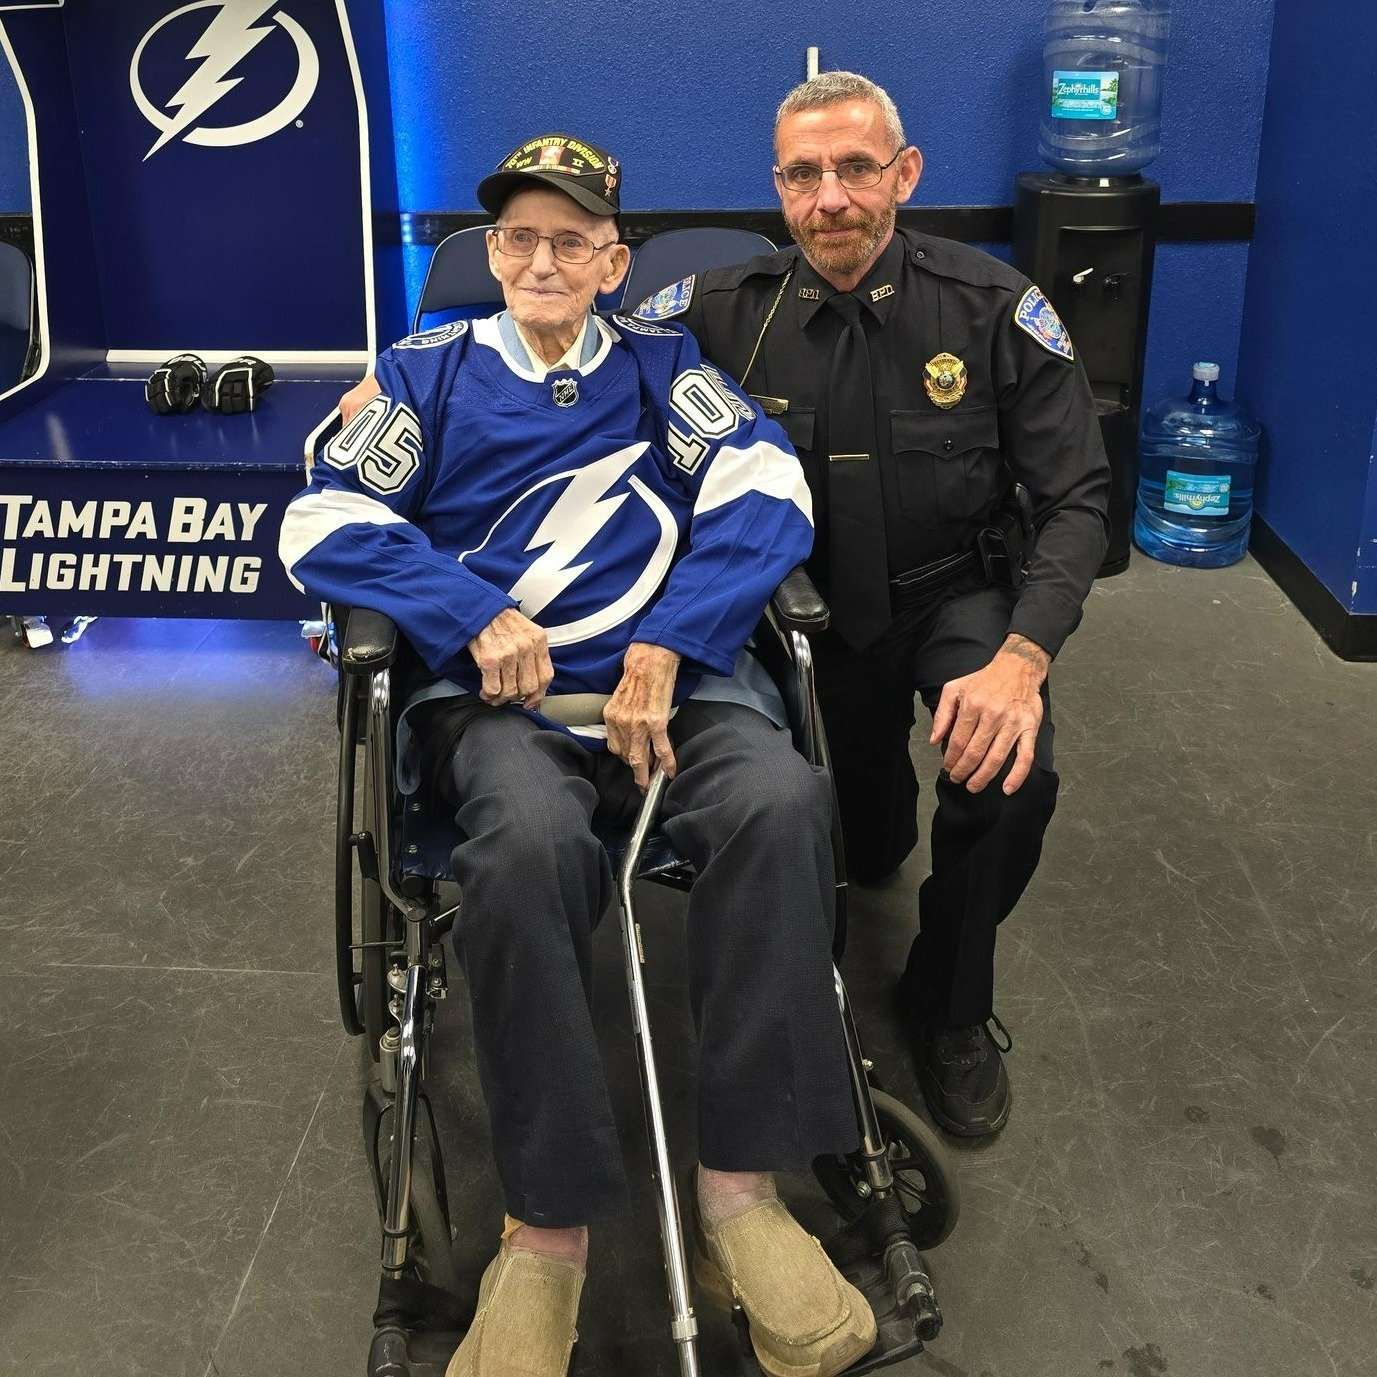 Saturday, Officer Cerniglia had the honor of escorting 105-year-old John Skeen to the Tampa Bay Lightning 2024 Stanley Cup Playoffs First Round game against the Florida Panthers. Staff Sergeant Skeen is a World War II veteran who fought in the Battle